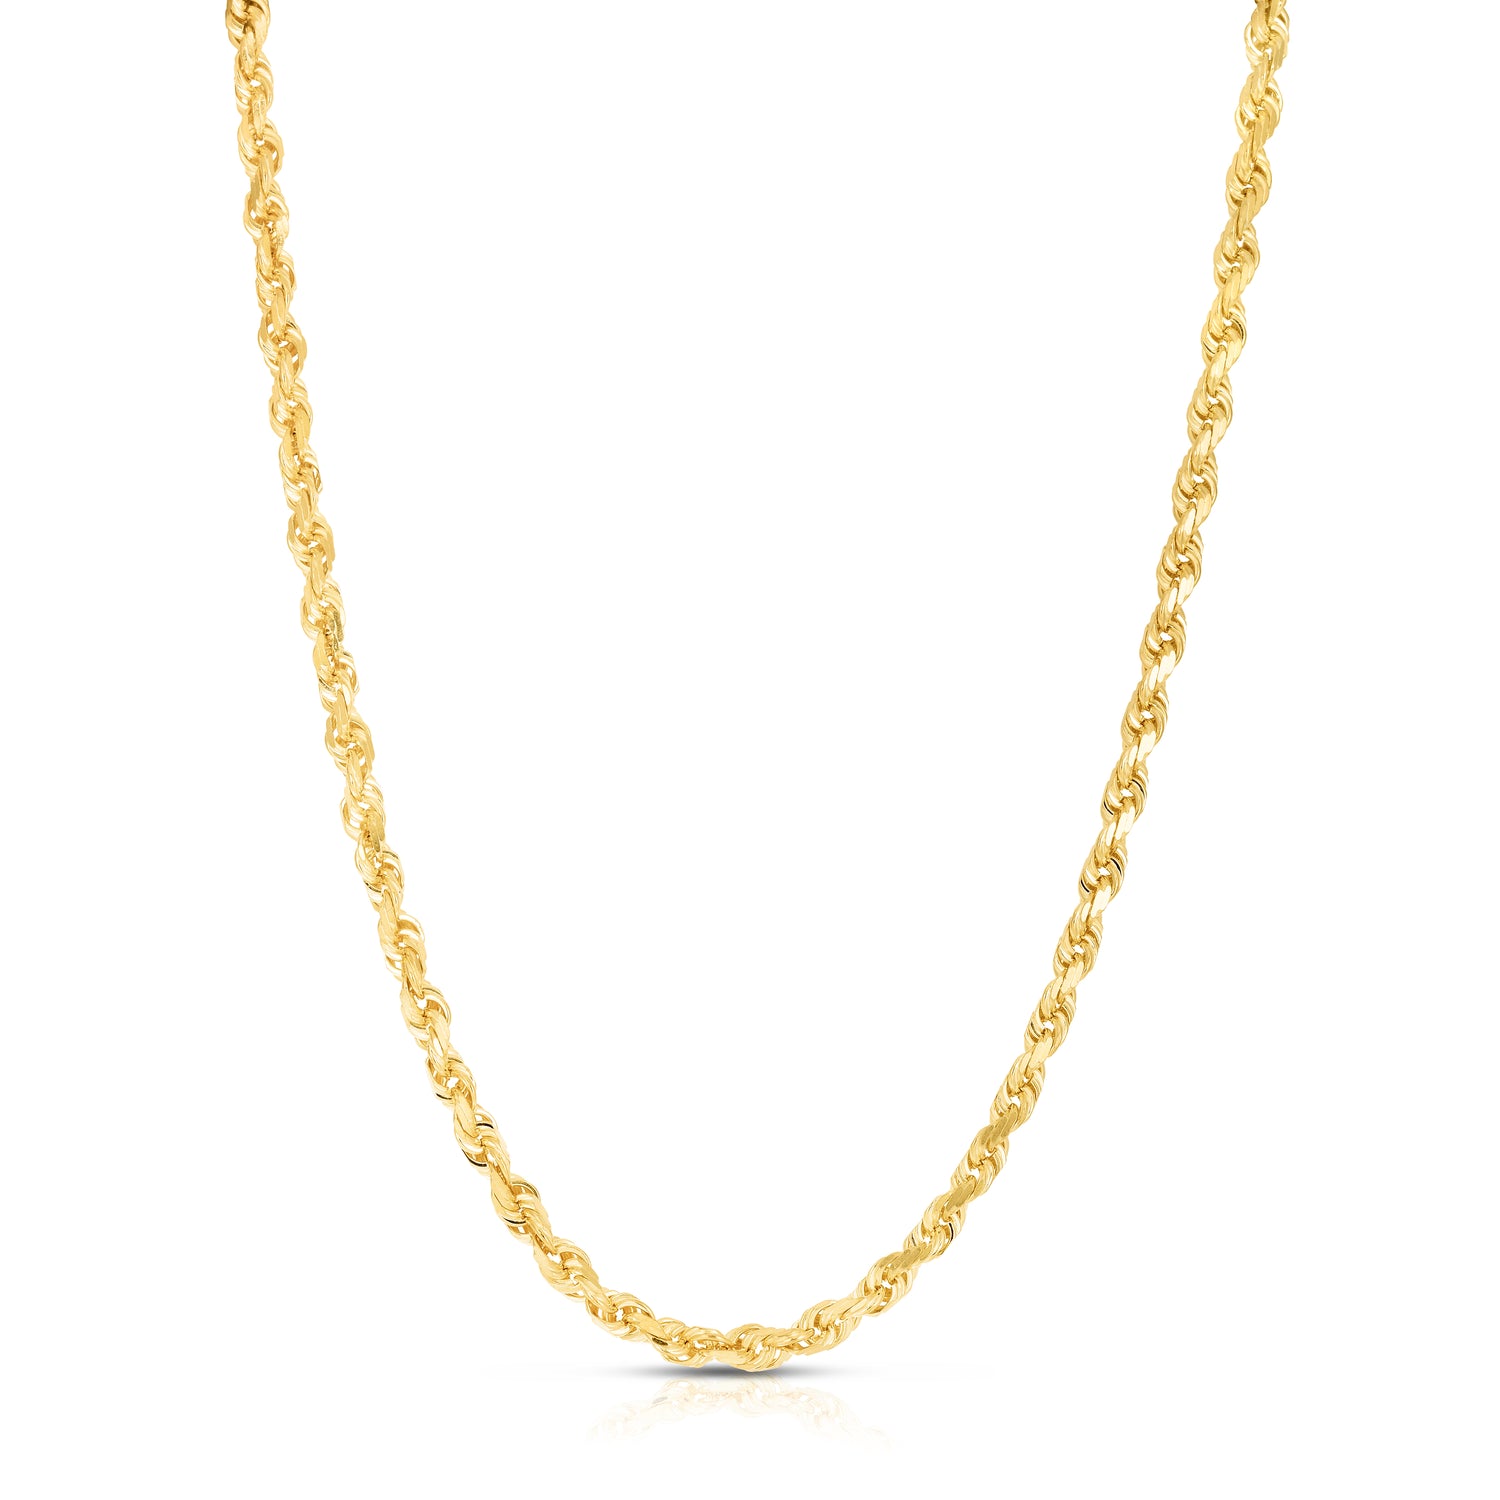 10k Yellow Gold 6mm Solid Diamond Cut Rope Chain Necklace